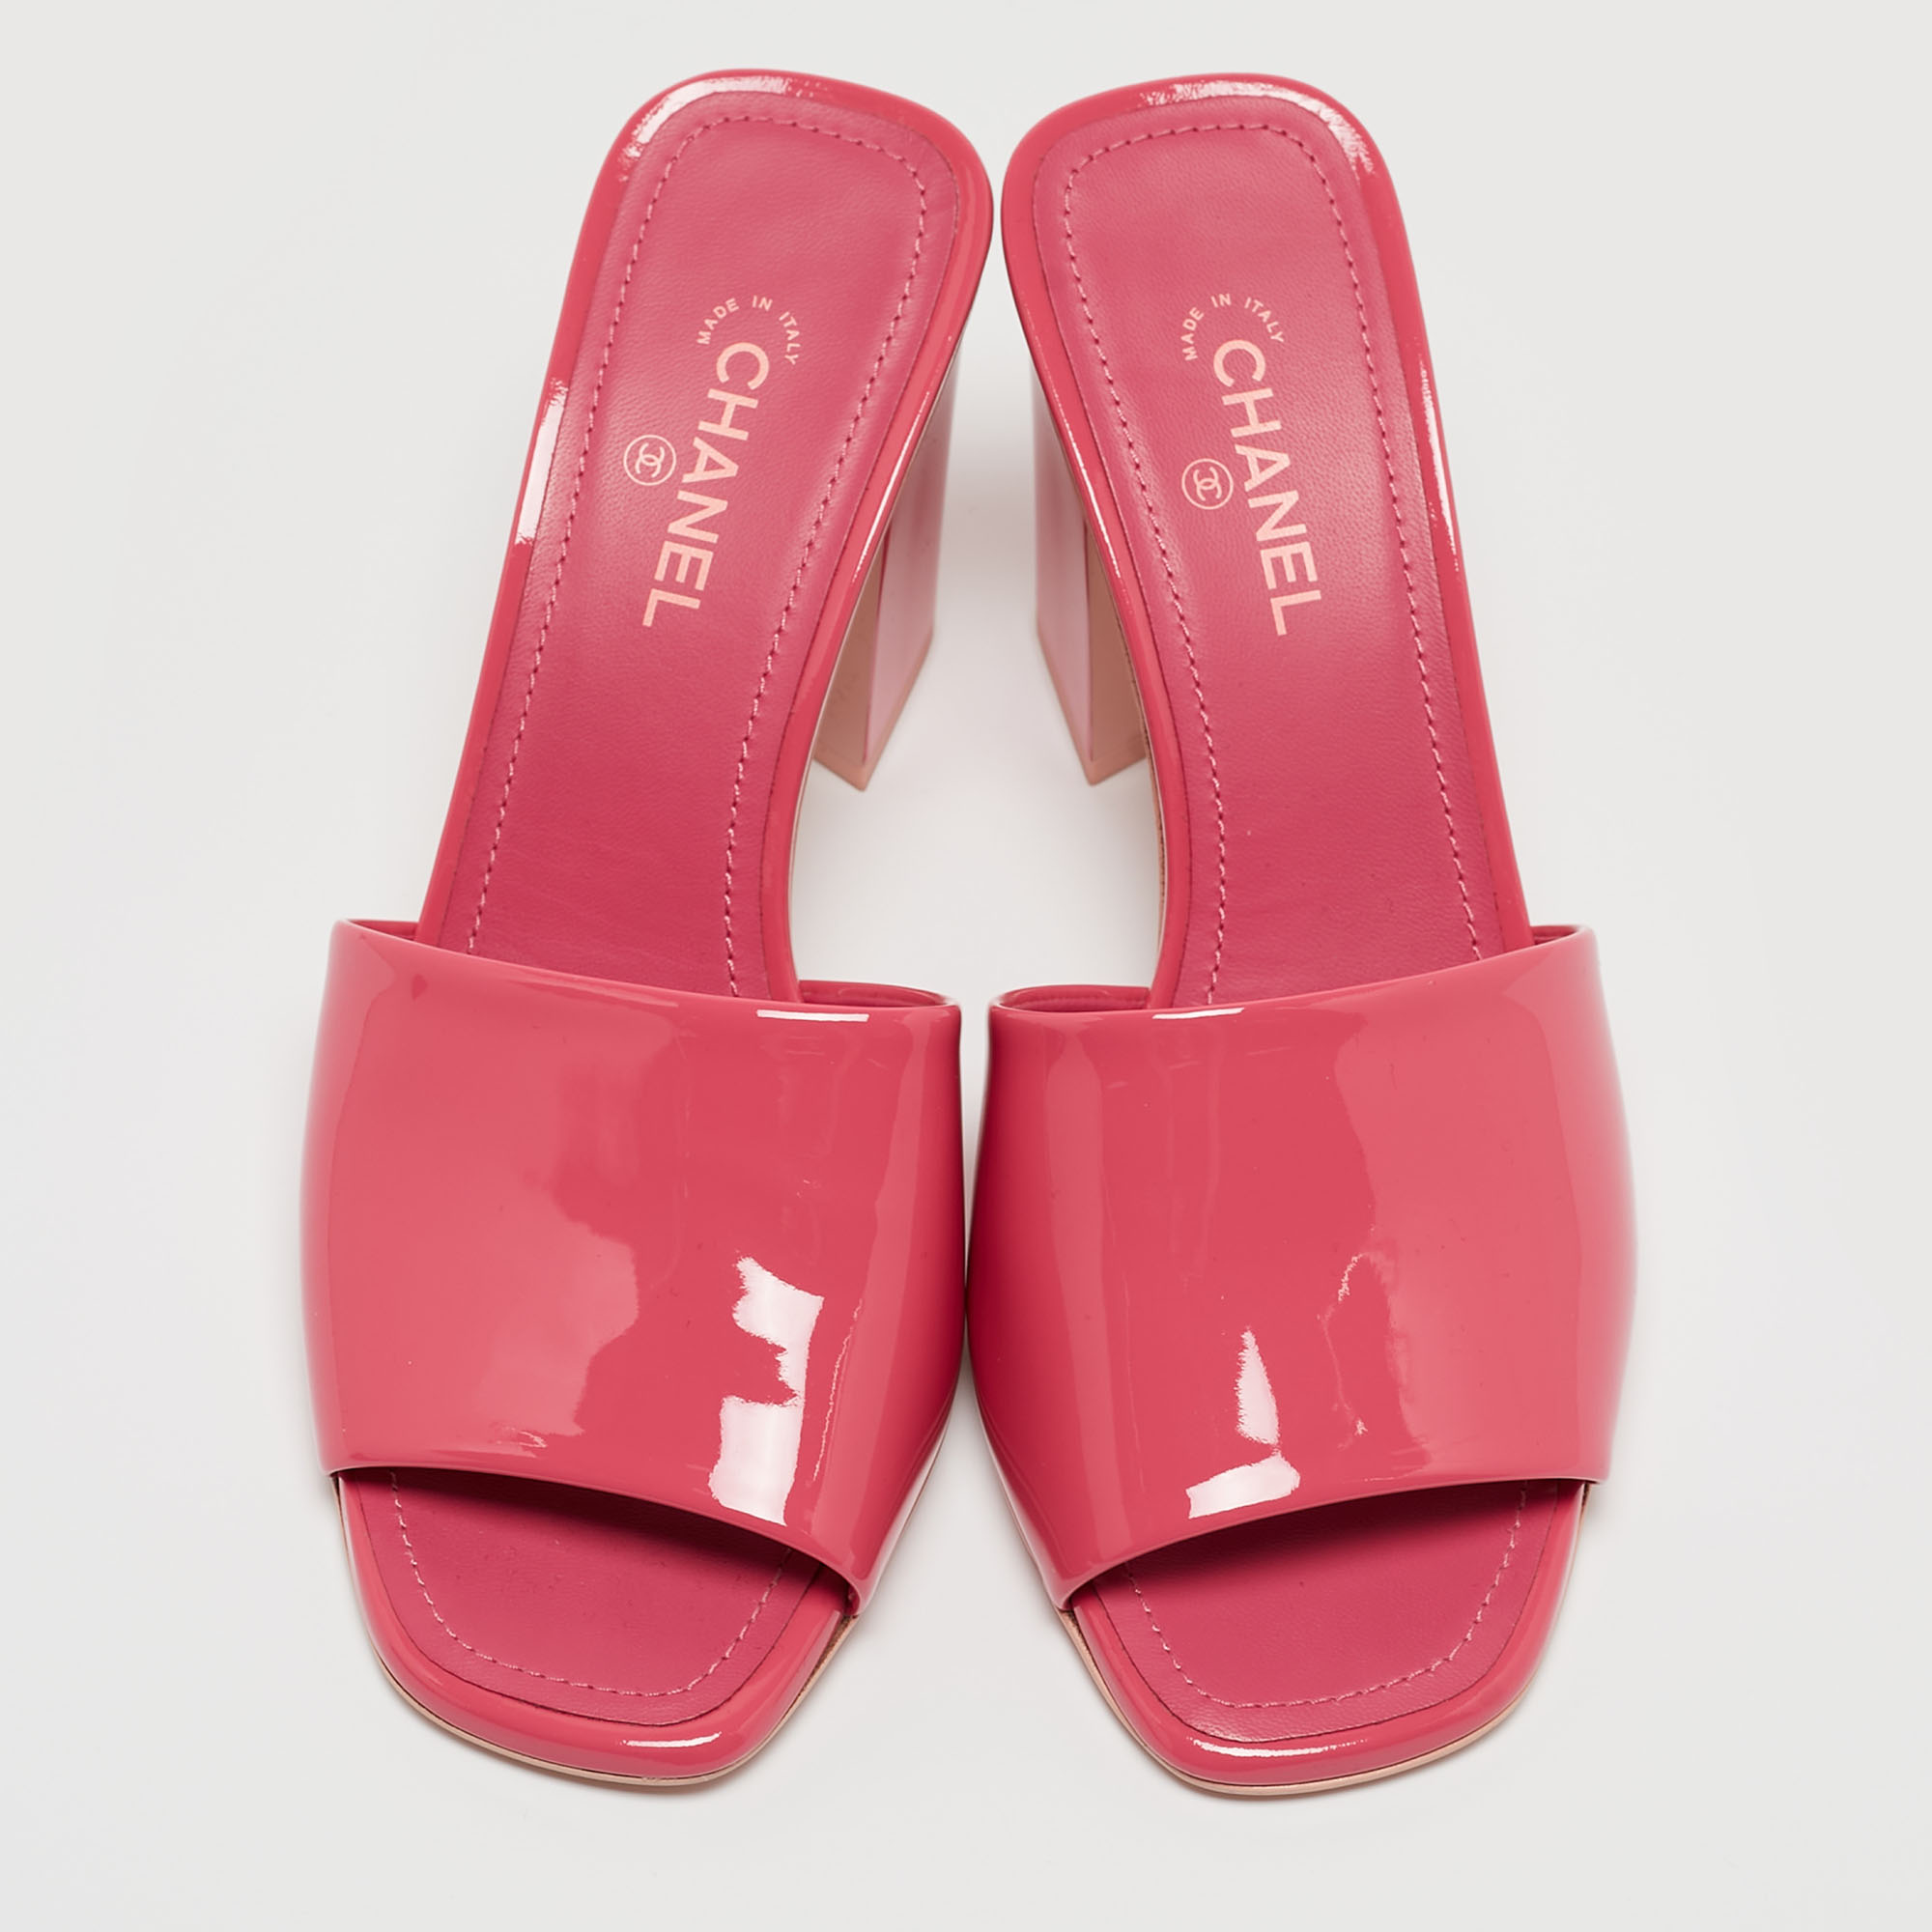 Chanel Pink Patent Leather CC Slide Sandals Size 36